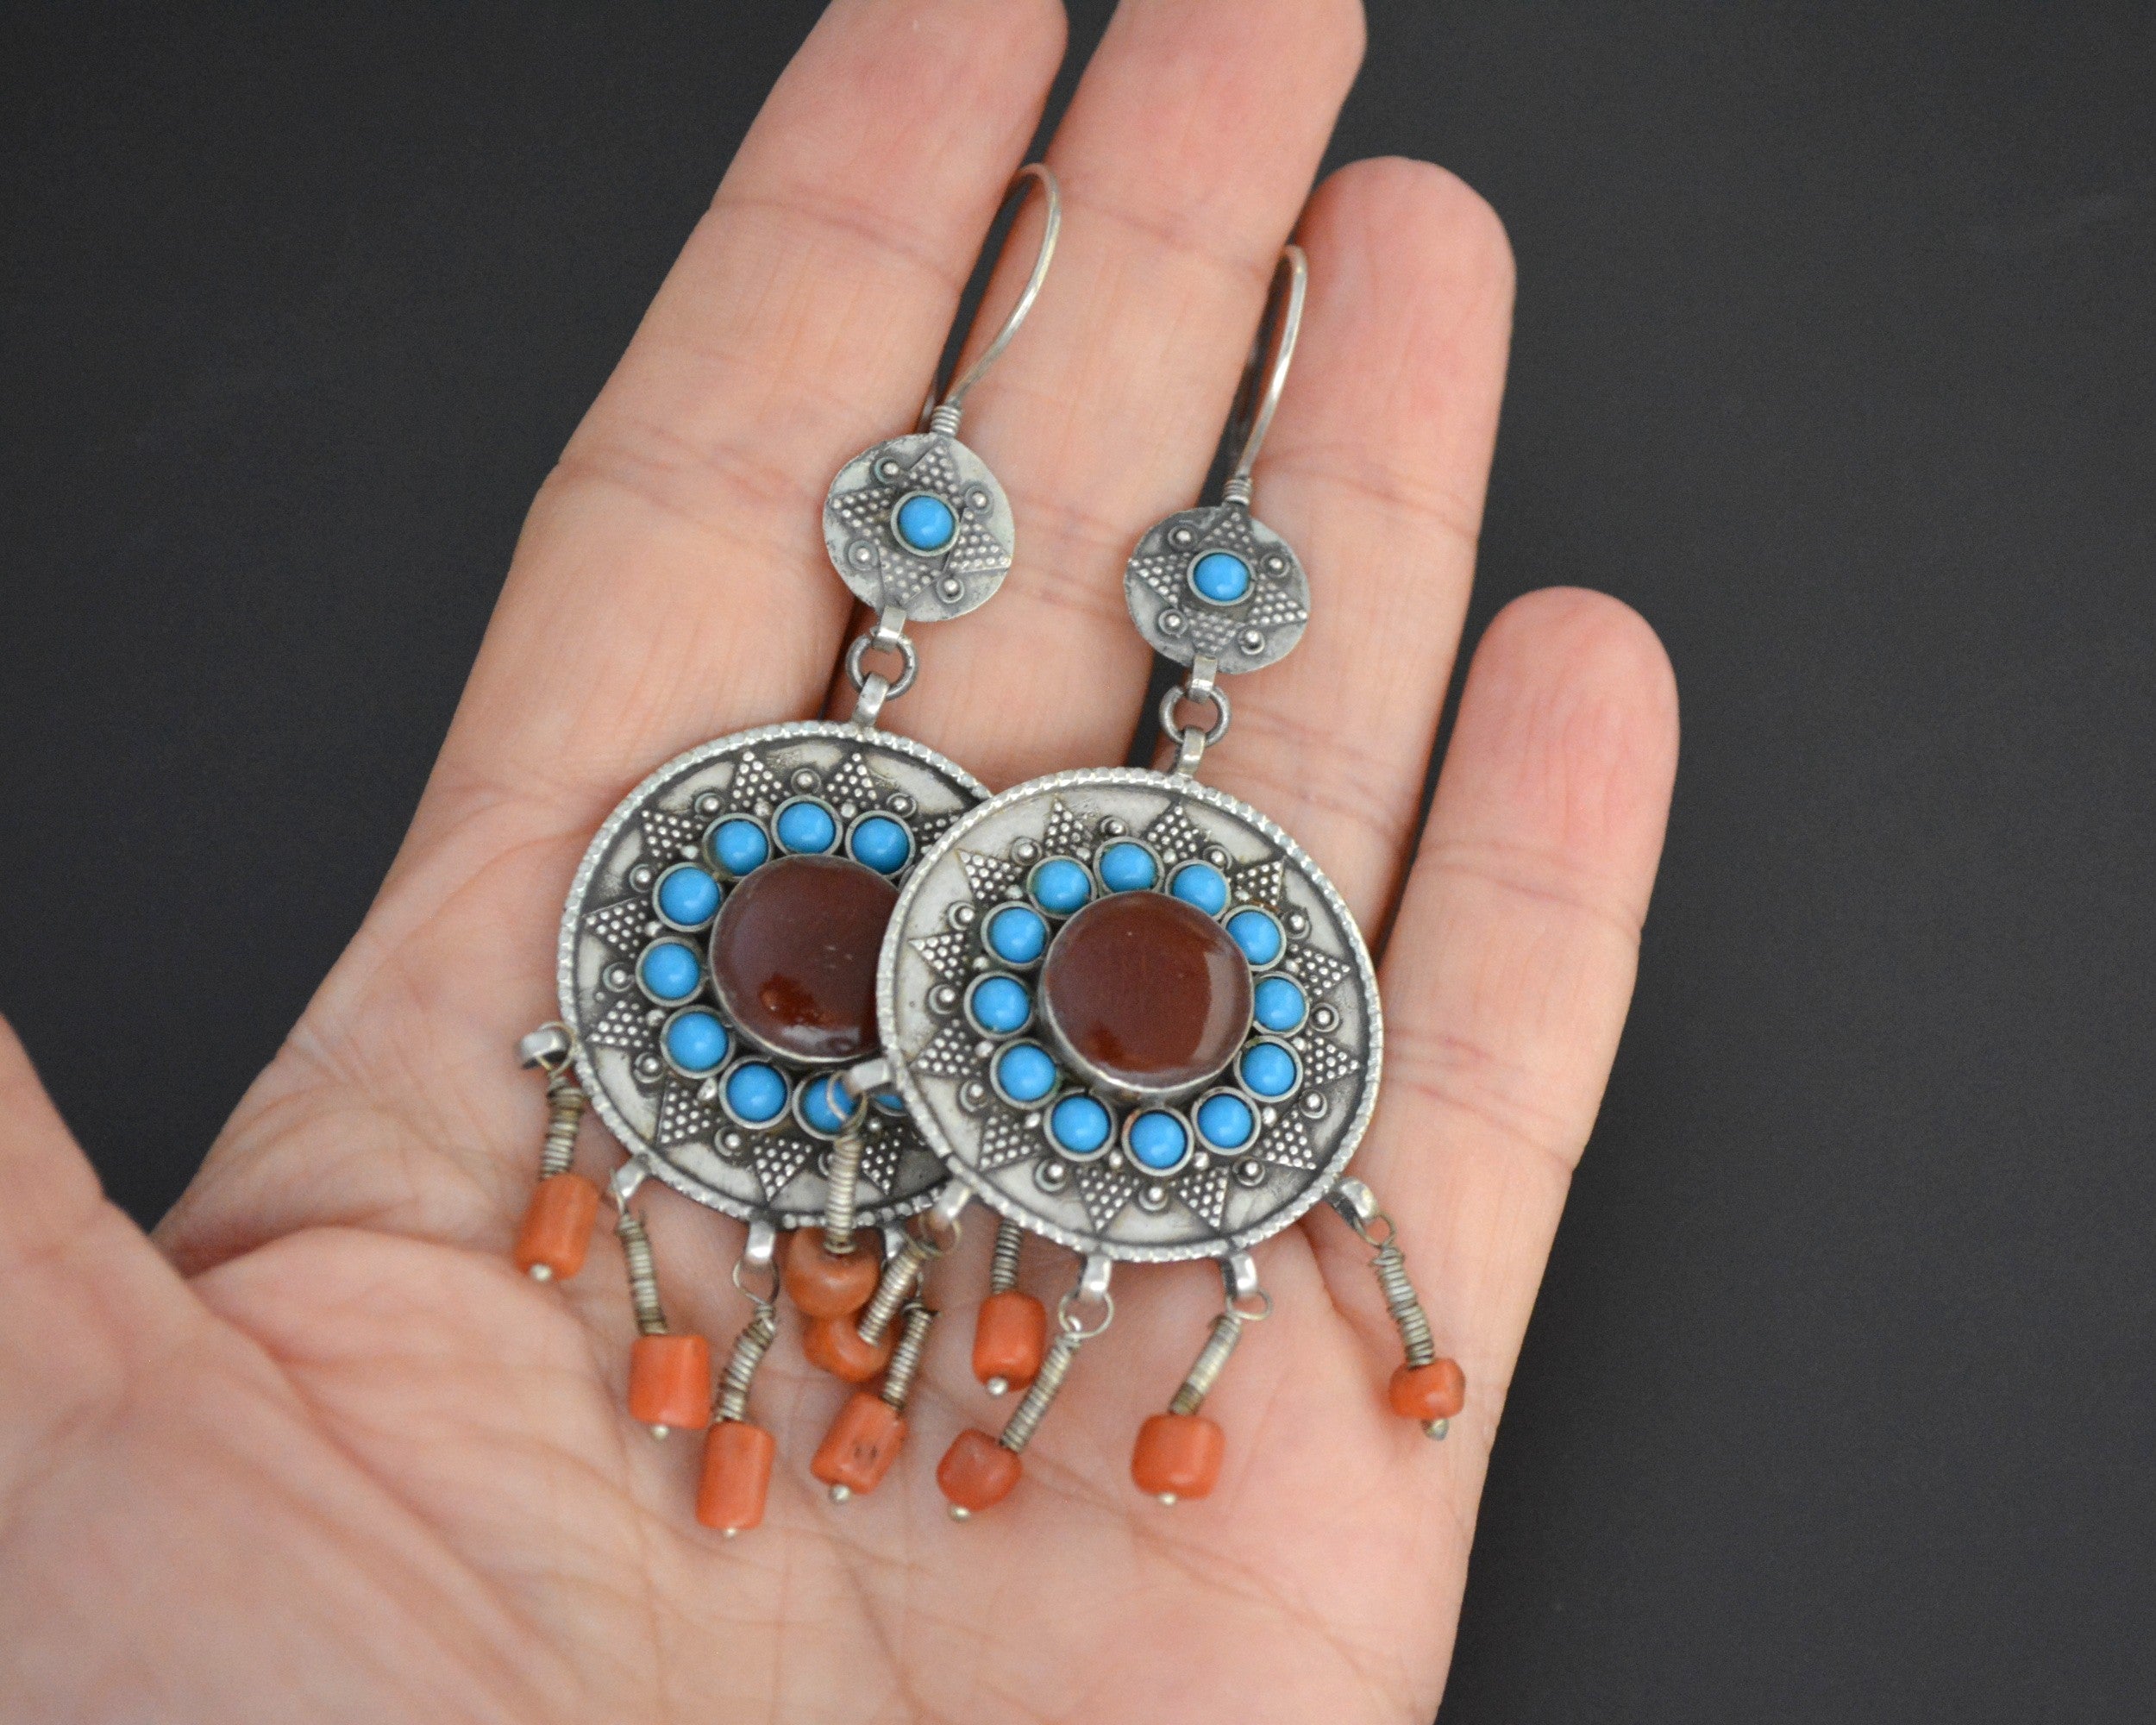 Turkmen Earrings with Carnelian, Turquoise and Coral